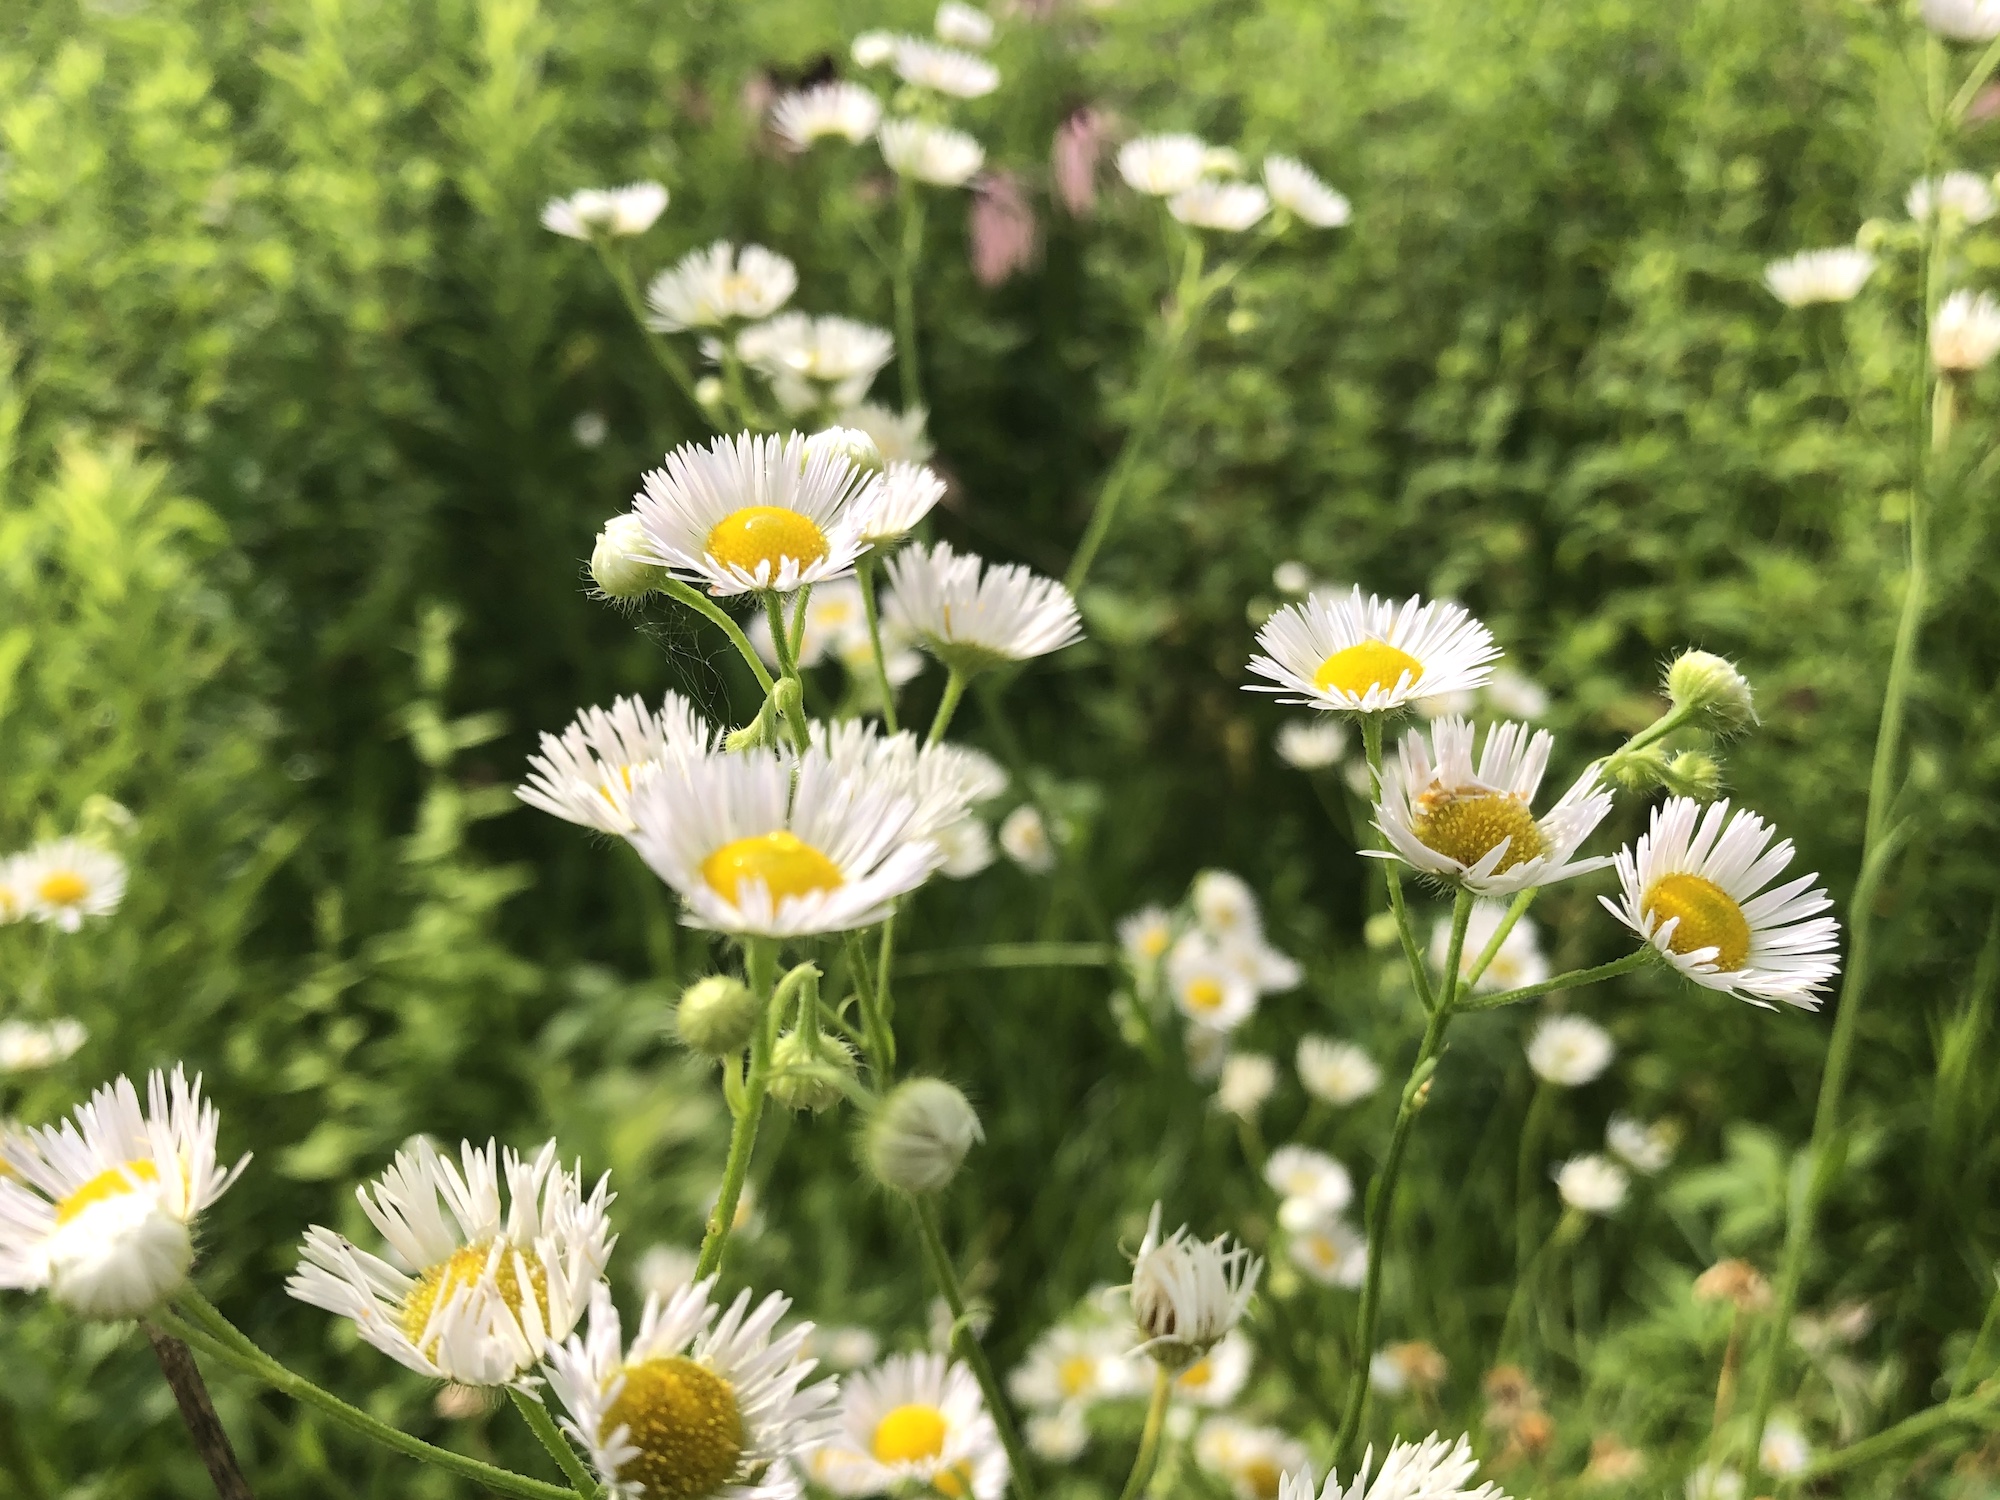 Fleabane on bank of retaining pond at the corner of Manitou Way and Nakoma Road in Madison, Wisconsin on July 6, 2019.